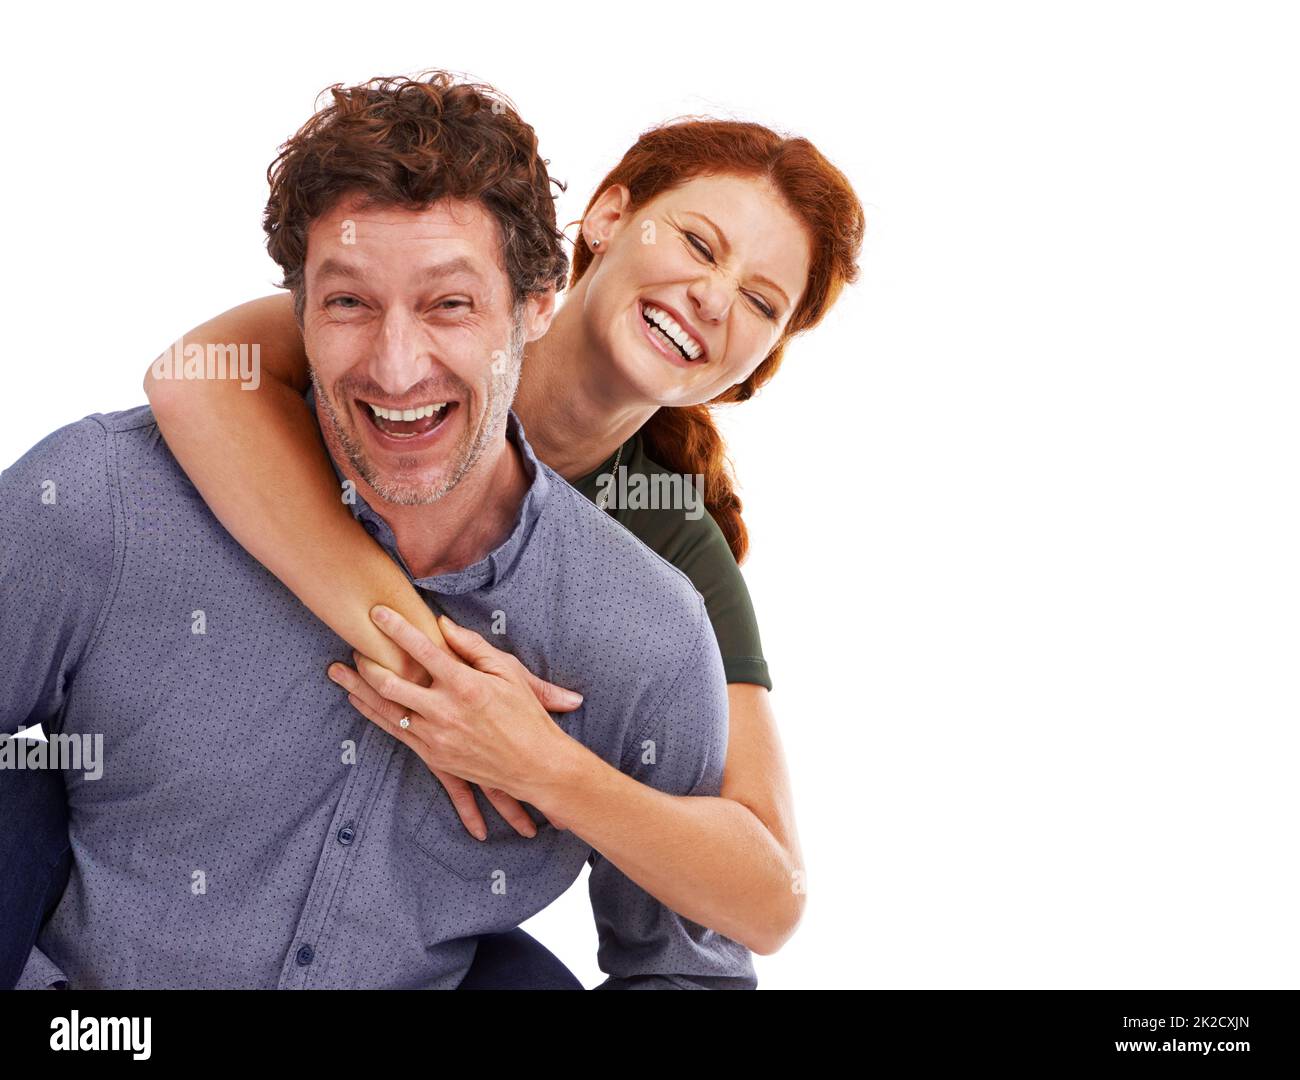 Having some afectionate fun. Studio portrait of a beautiful couple being playful and affectionate. Stock Photo